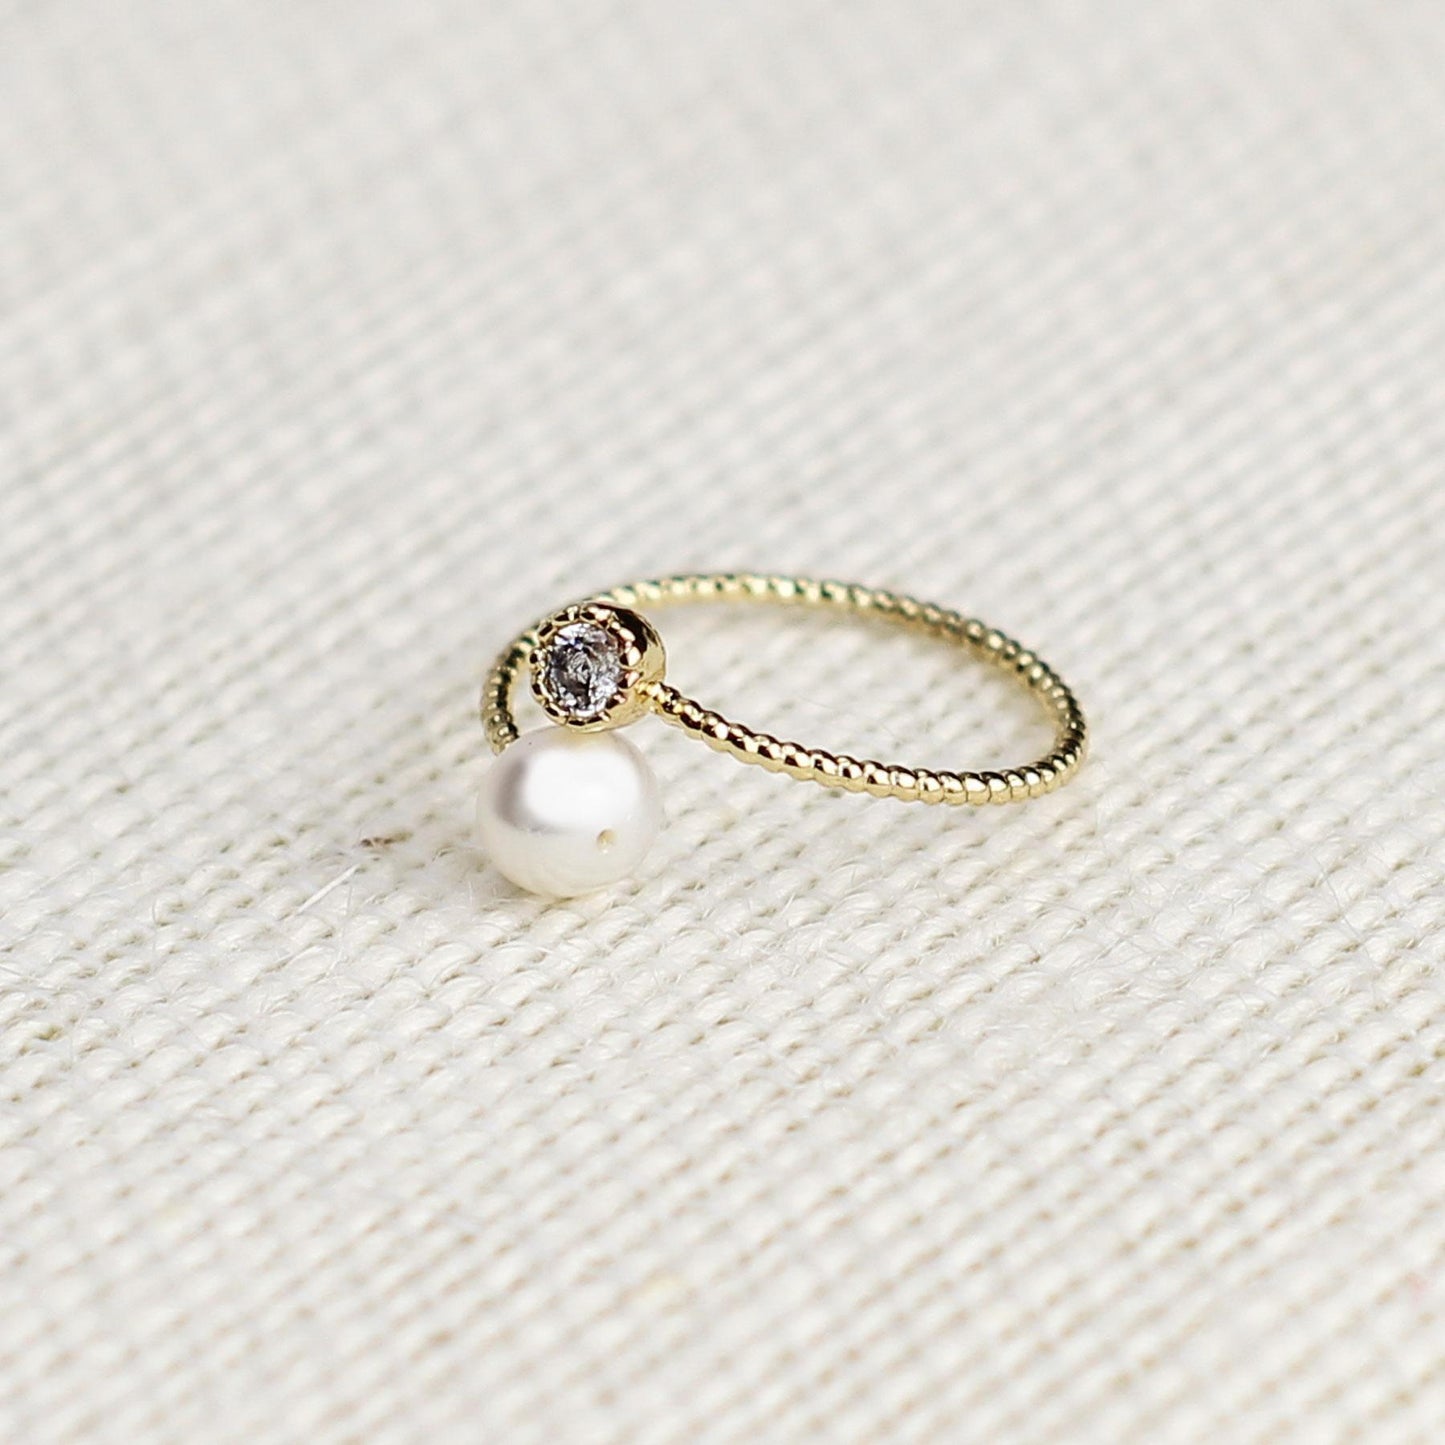 Peculiar Natural Pearls Jewelry Simple Round Open Ring Pearl Stud  Stainless Gold Plated Adjustable